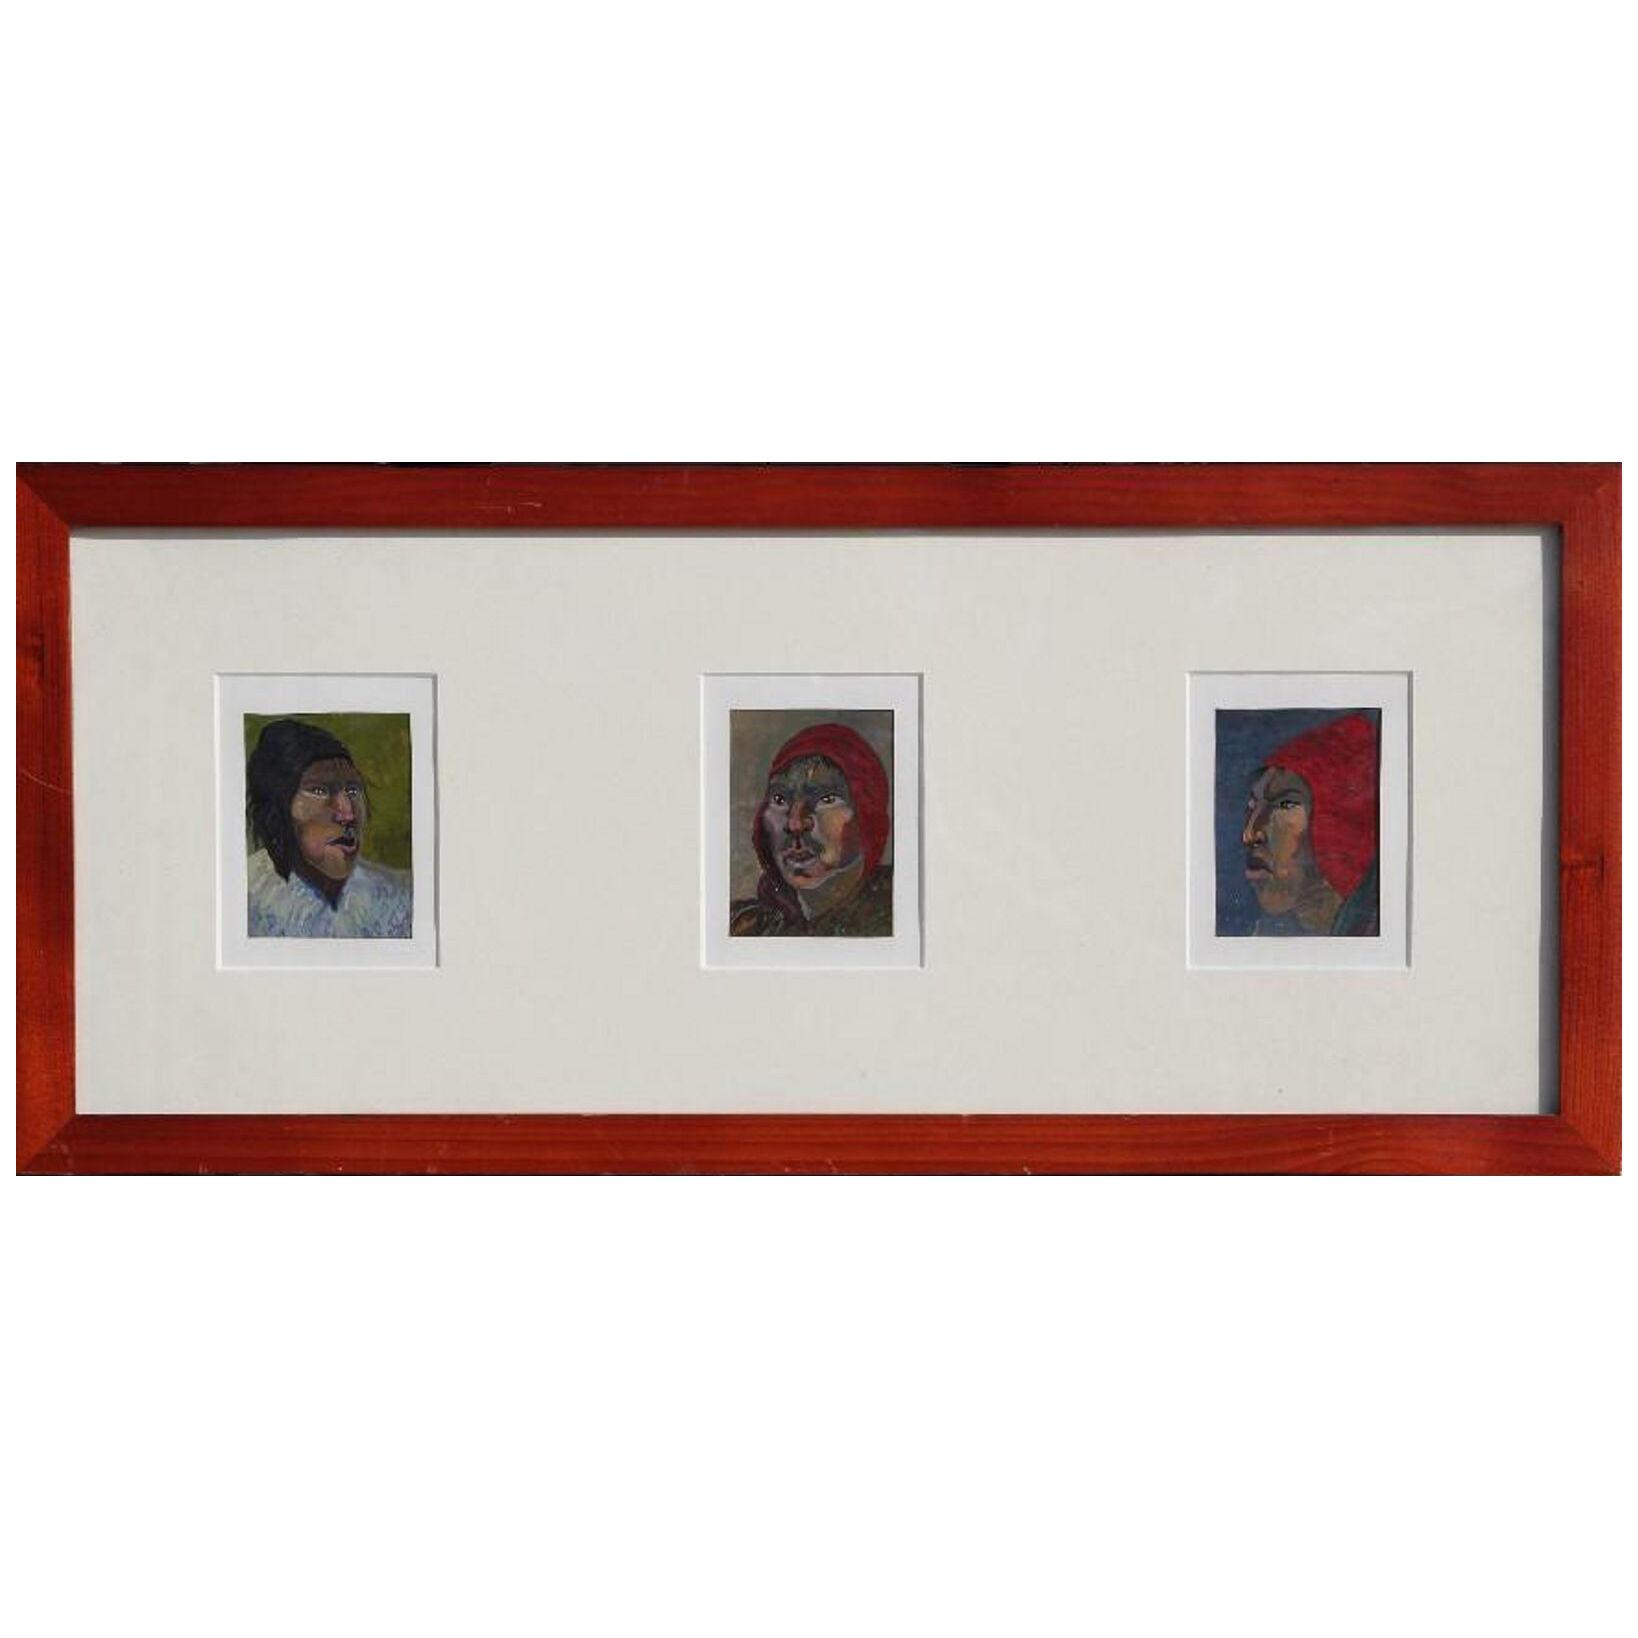 Modern Miniature S American or Native American Portraits Paintings Signed Erwin